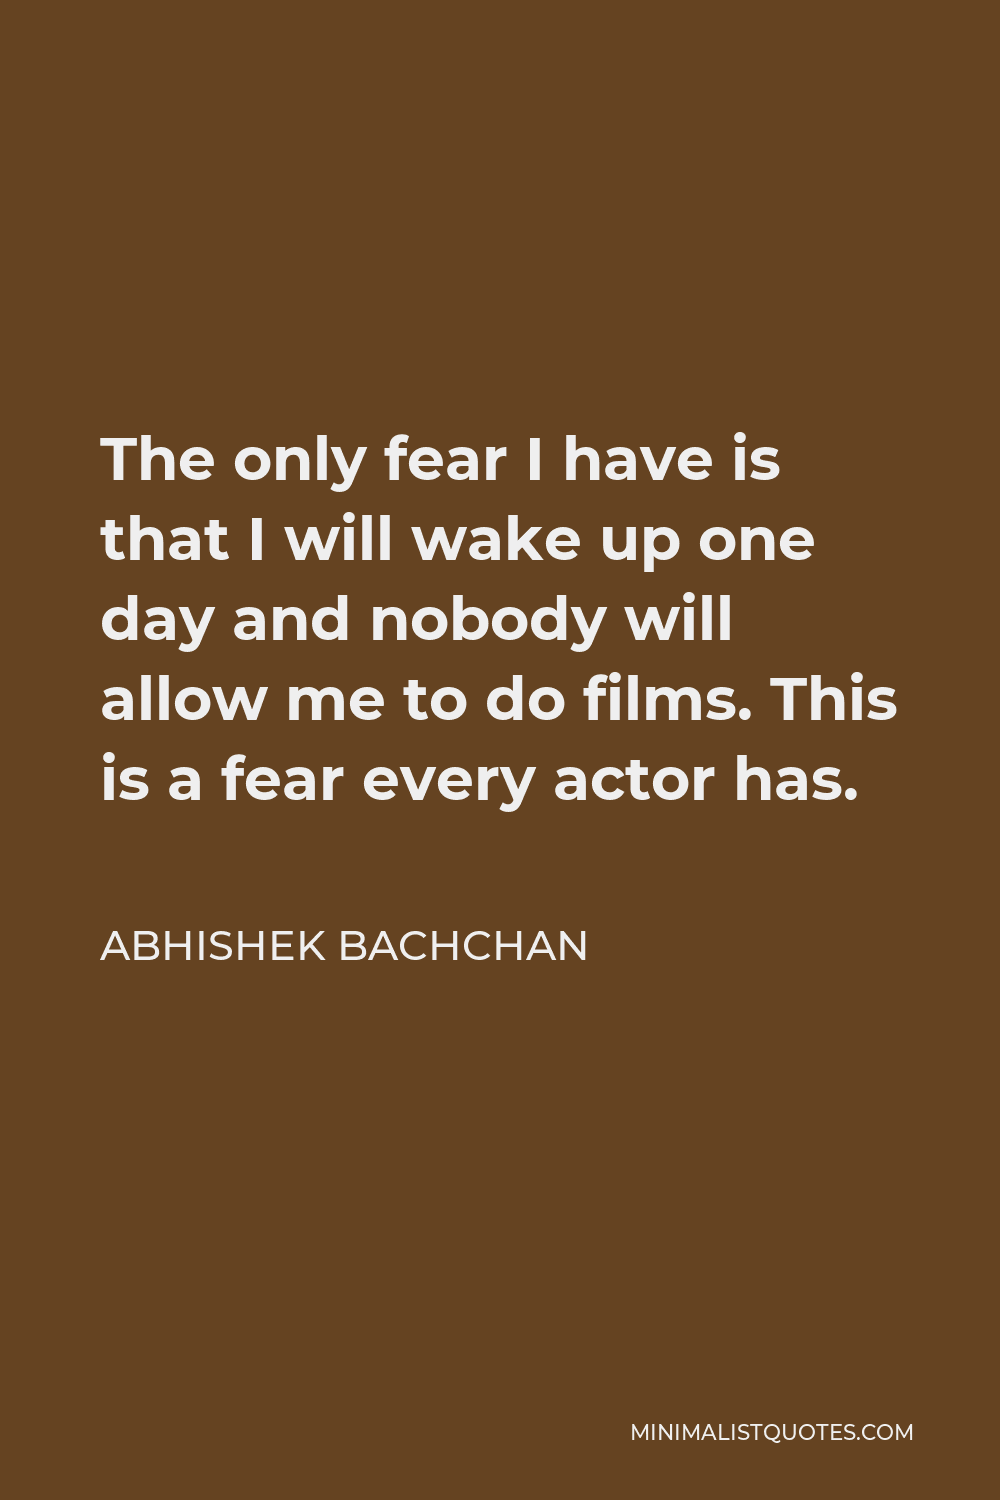 Abhishek Bachchan Quote - The only fear I have is that I will wake up one day and nobody will allow me to do films. This is a fear every actor has.